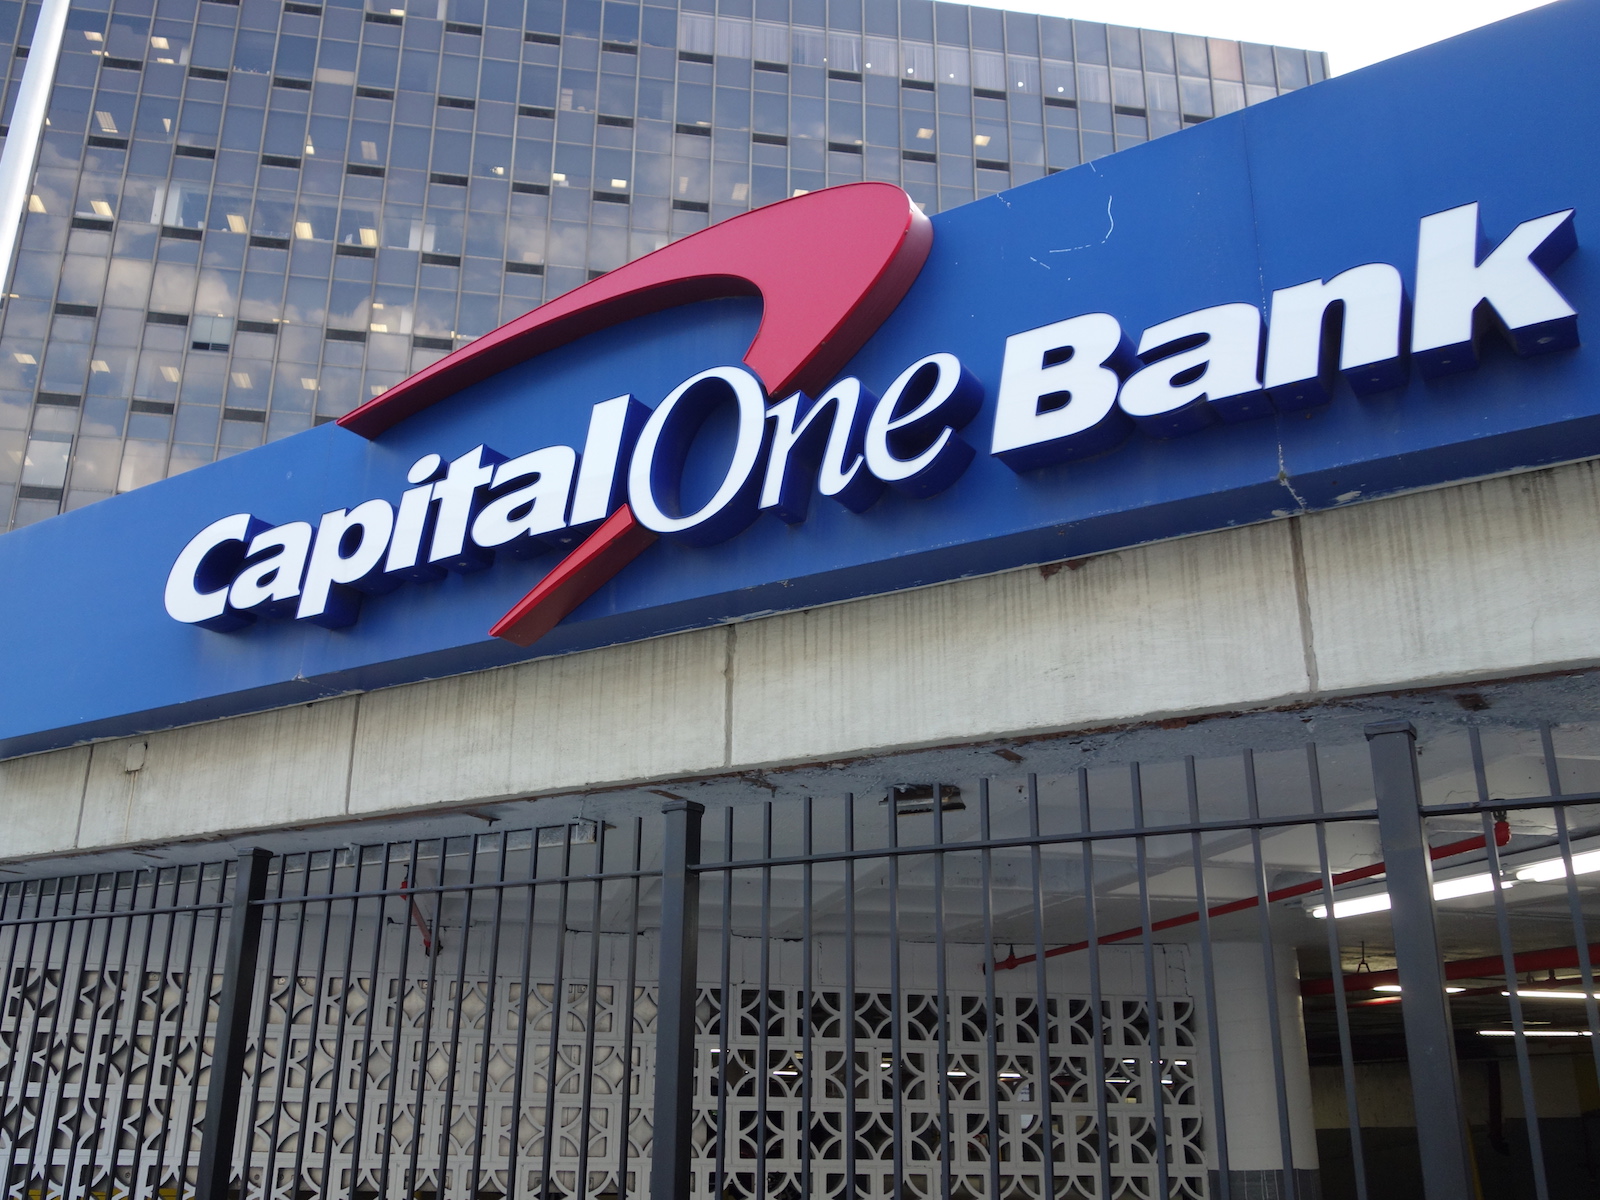 Capital One Cards